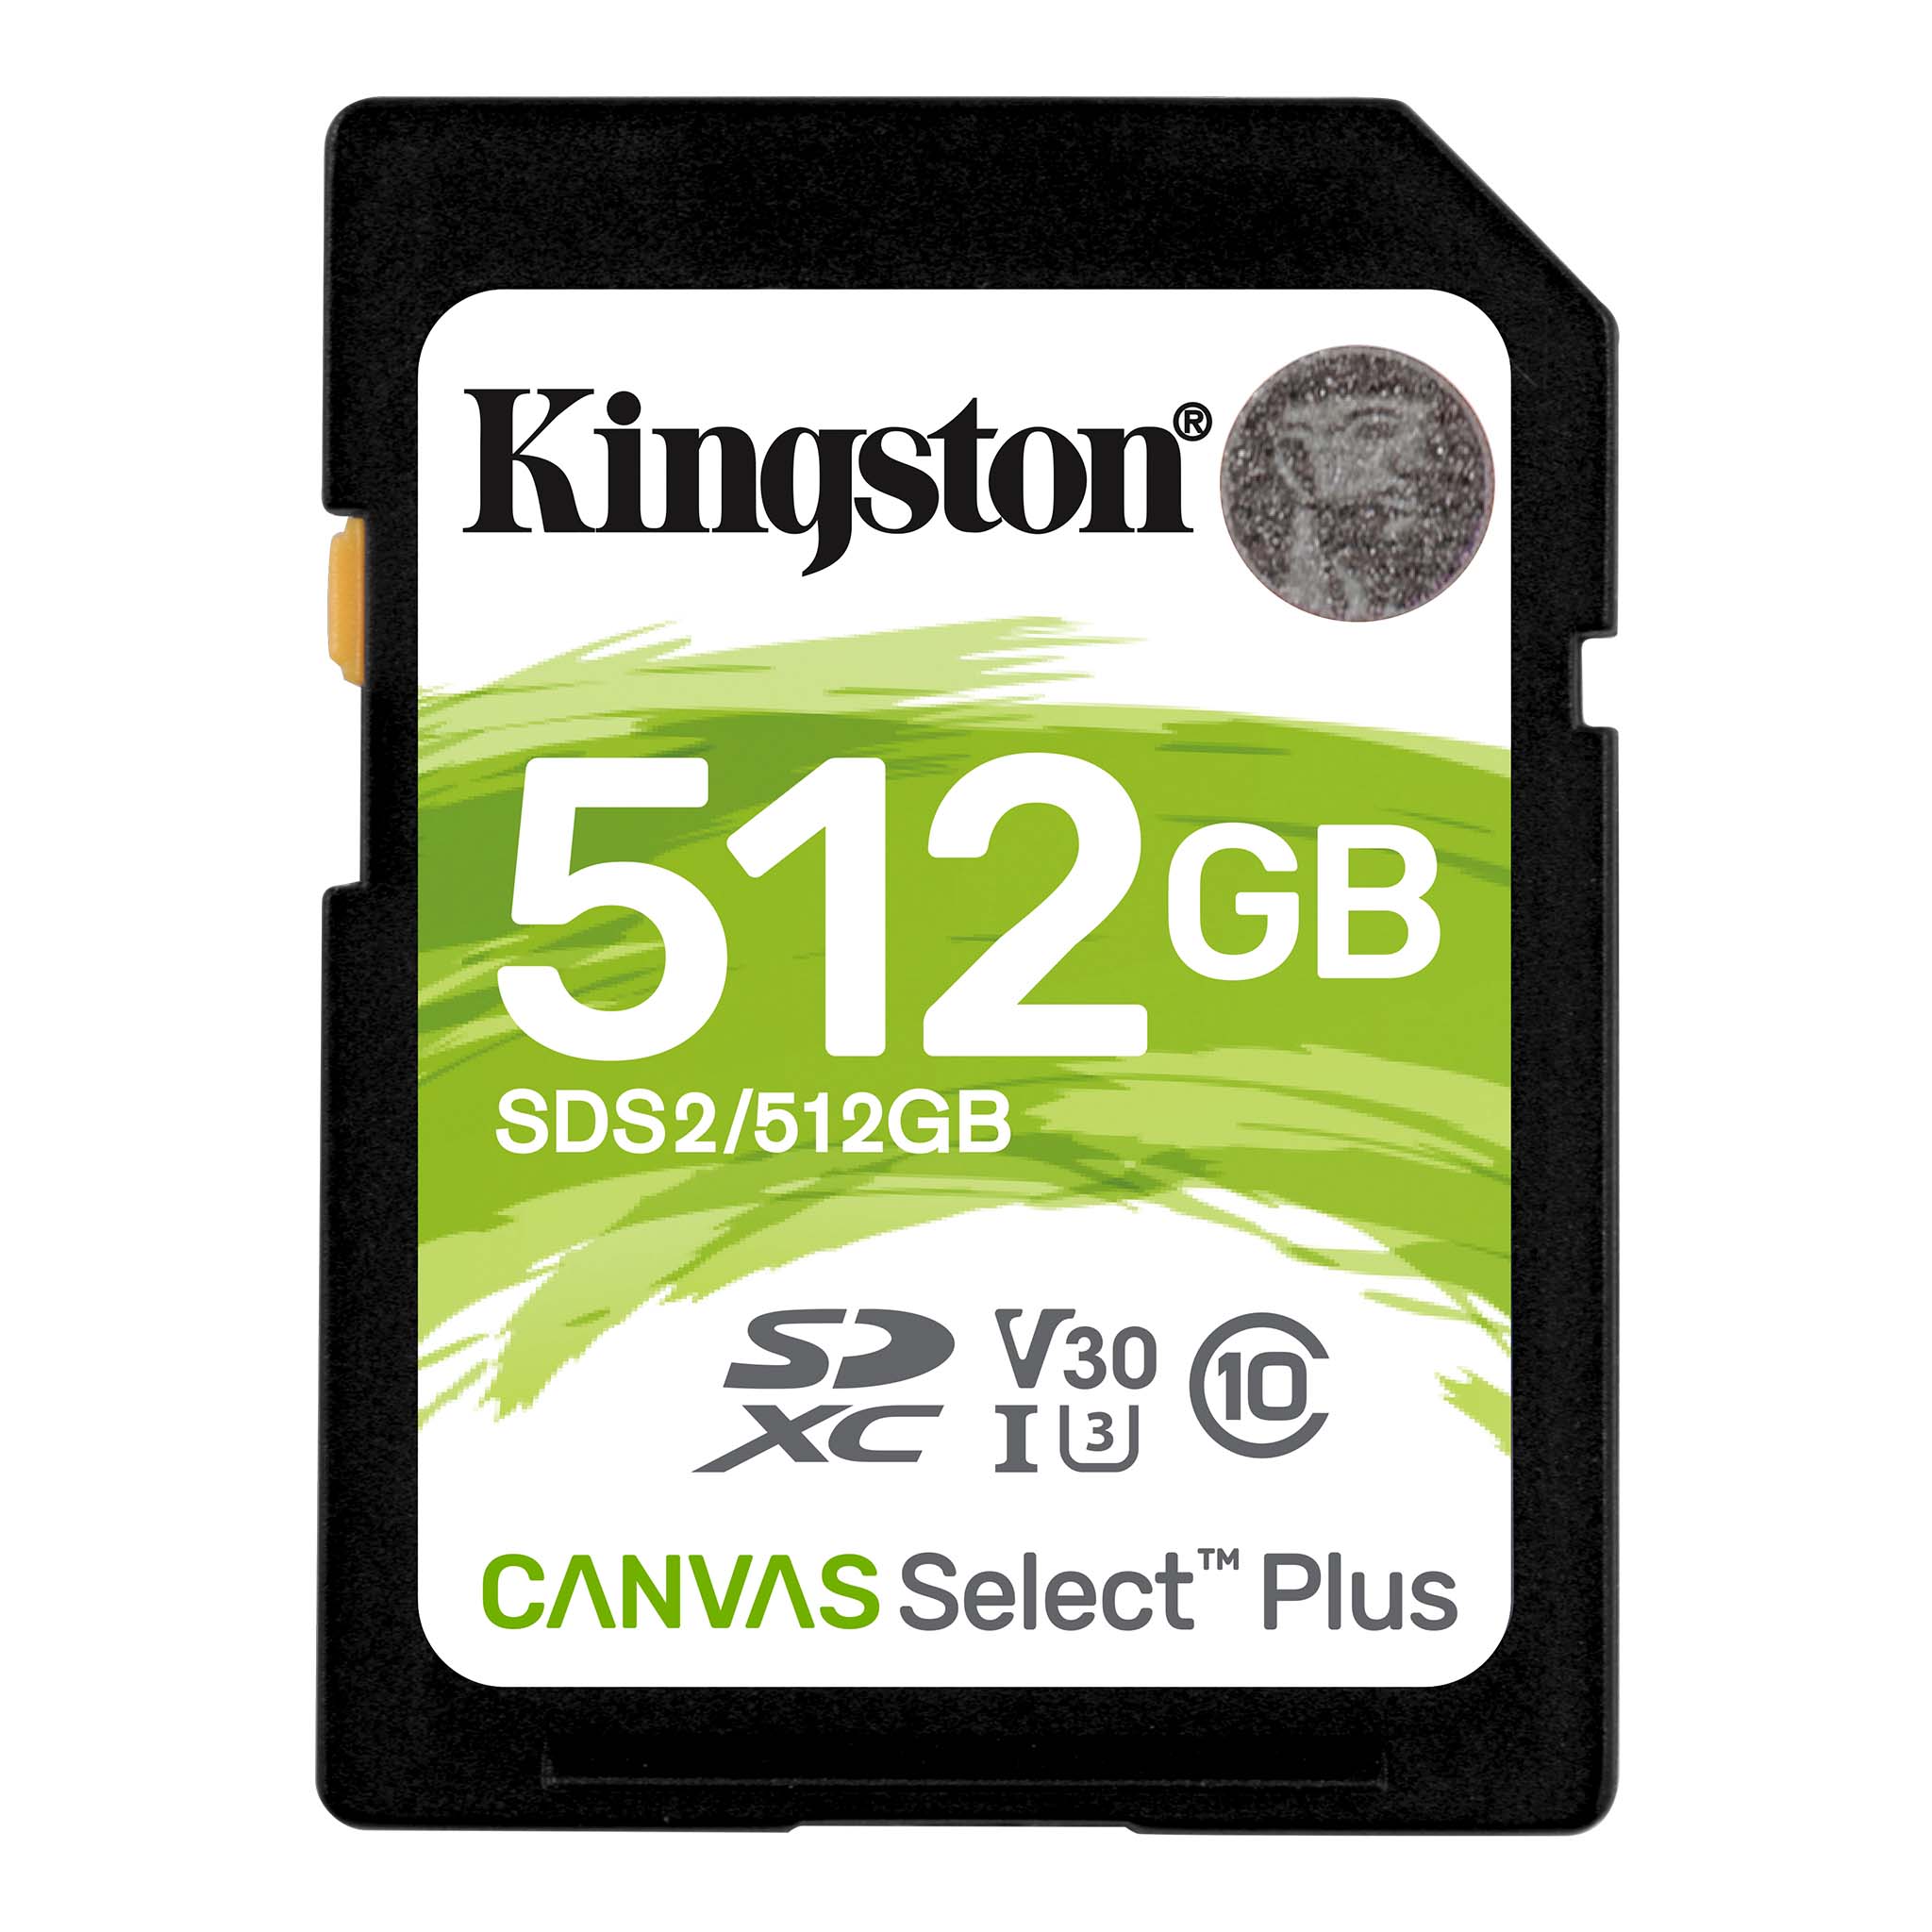 C&U Kingston 128GB DragonTouch V80 MicroSDXC Canvas Select Plus Card Verified by SanFlash. 100MBs Works with Kingston